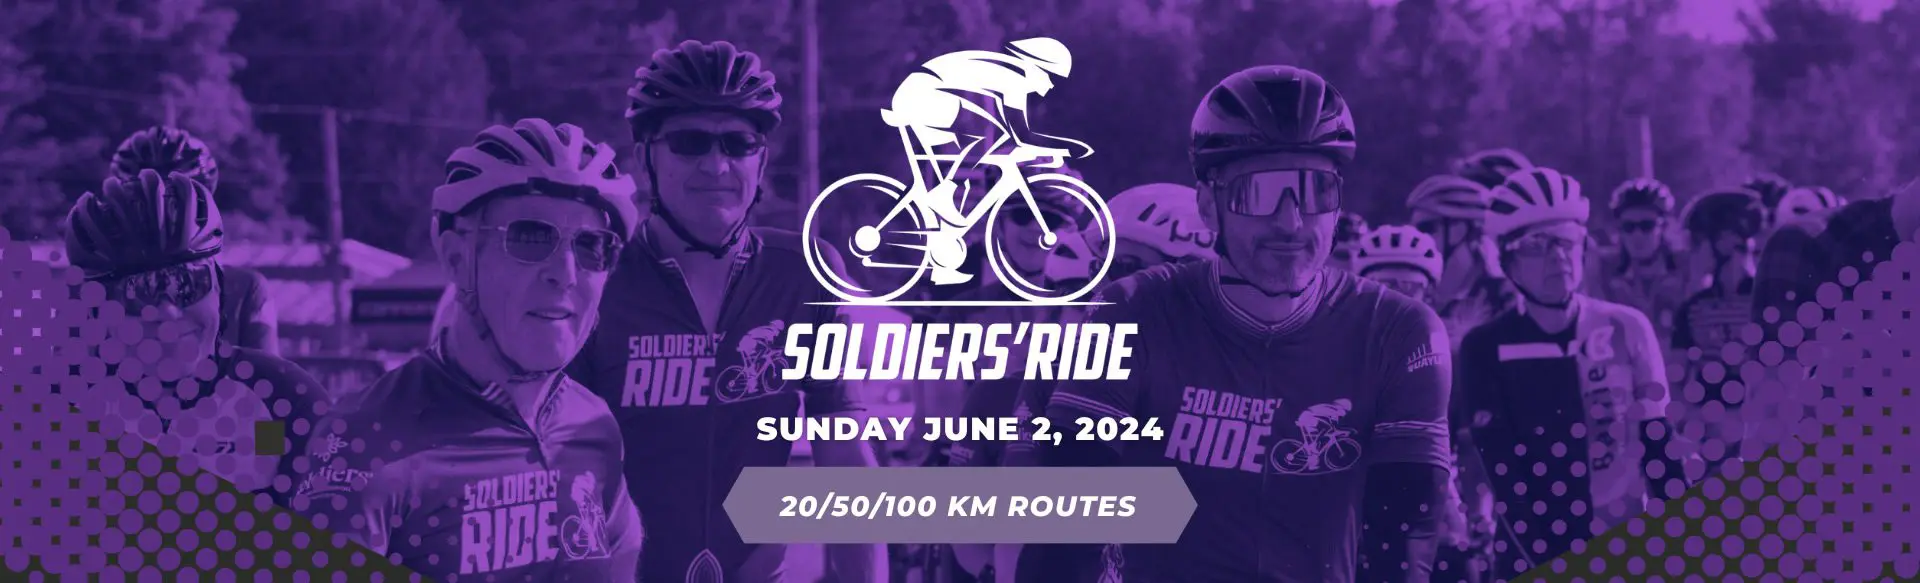 Soldiers' Ride - Sunday, June 2, 2024 - 20/50/100km Routes